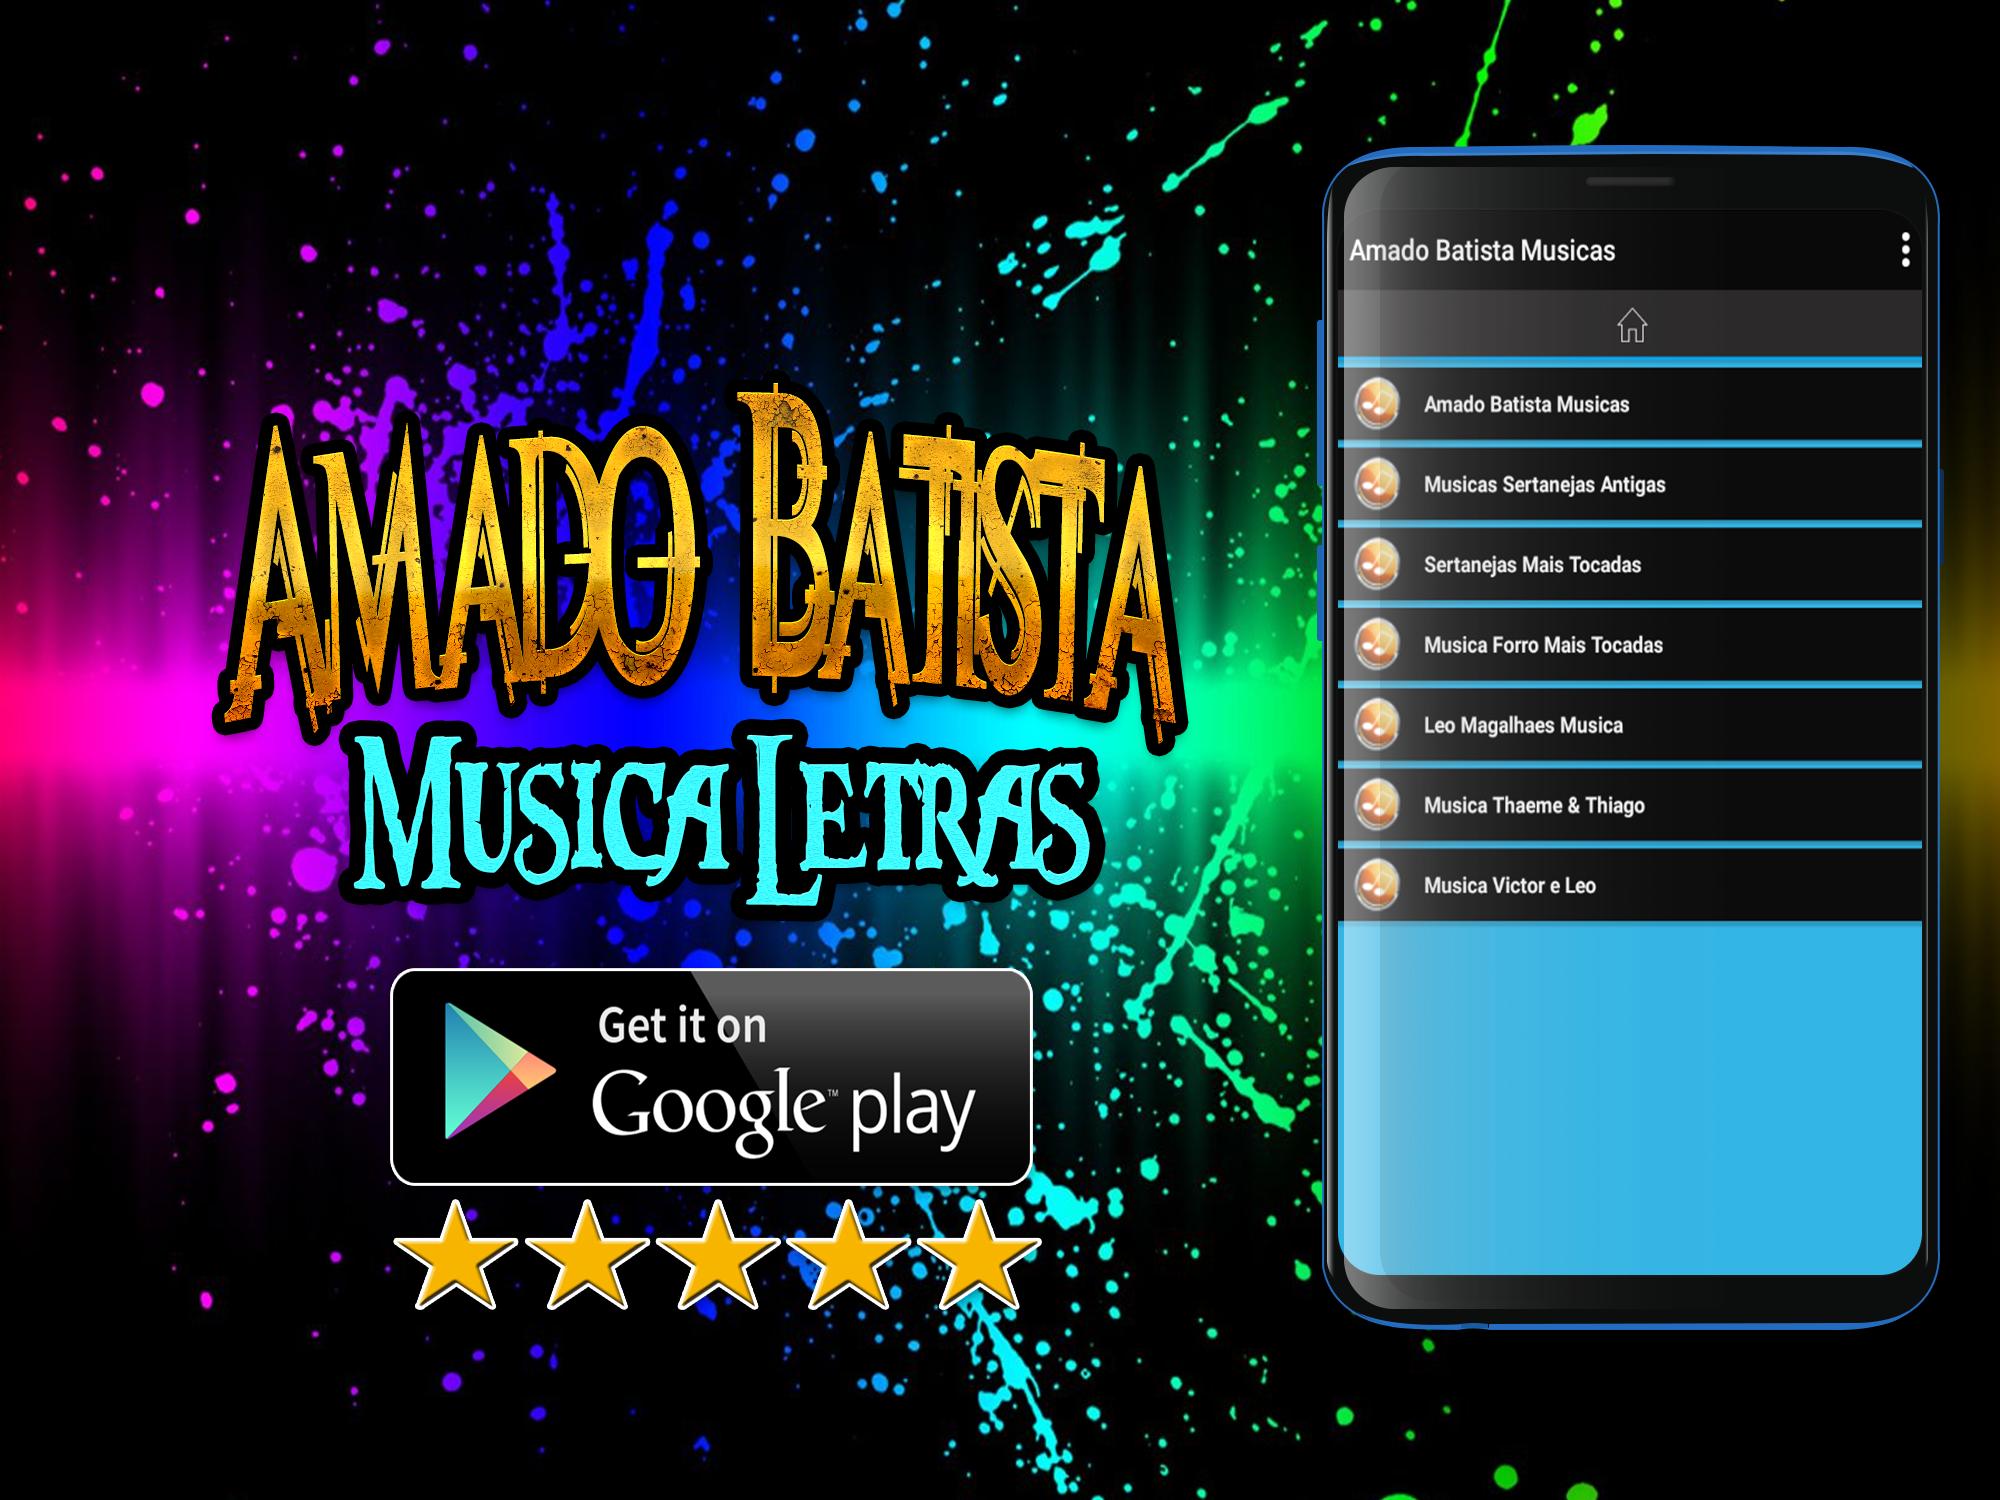 Amado Batista Musica Best Mp3 Letra Completo for Android - APK Download